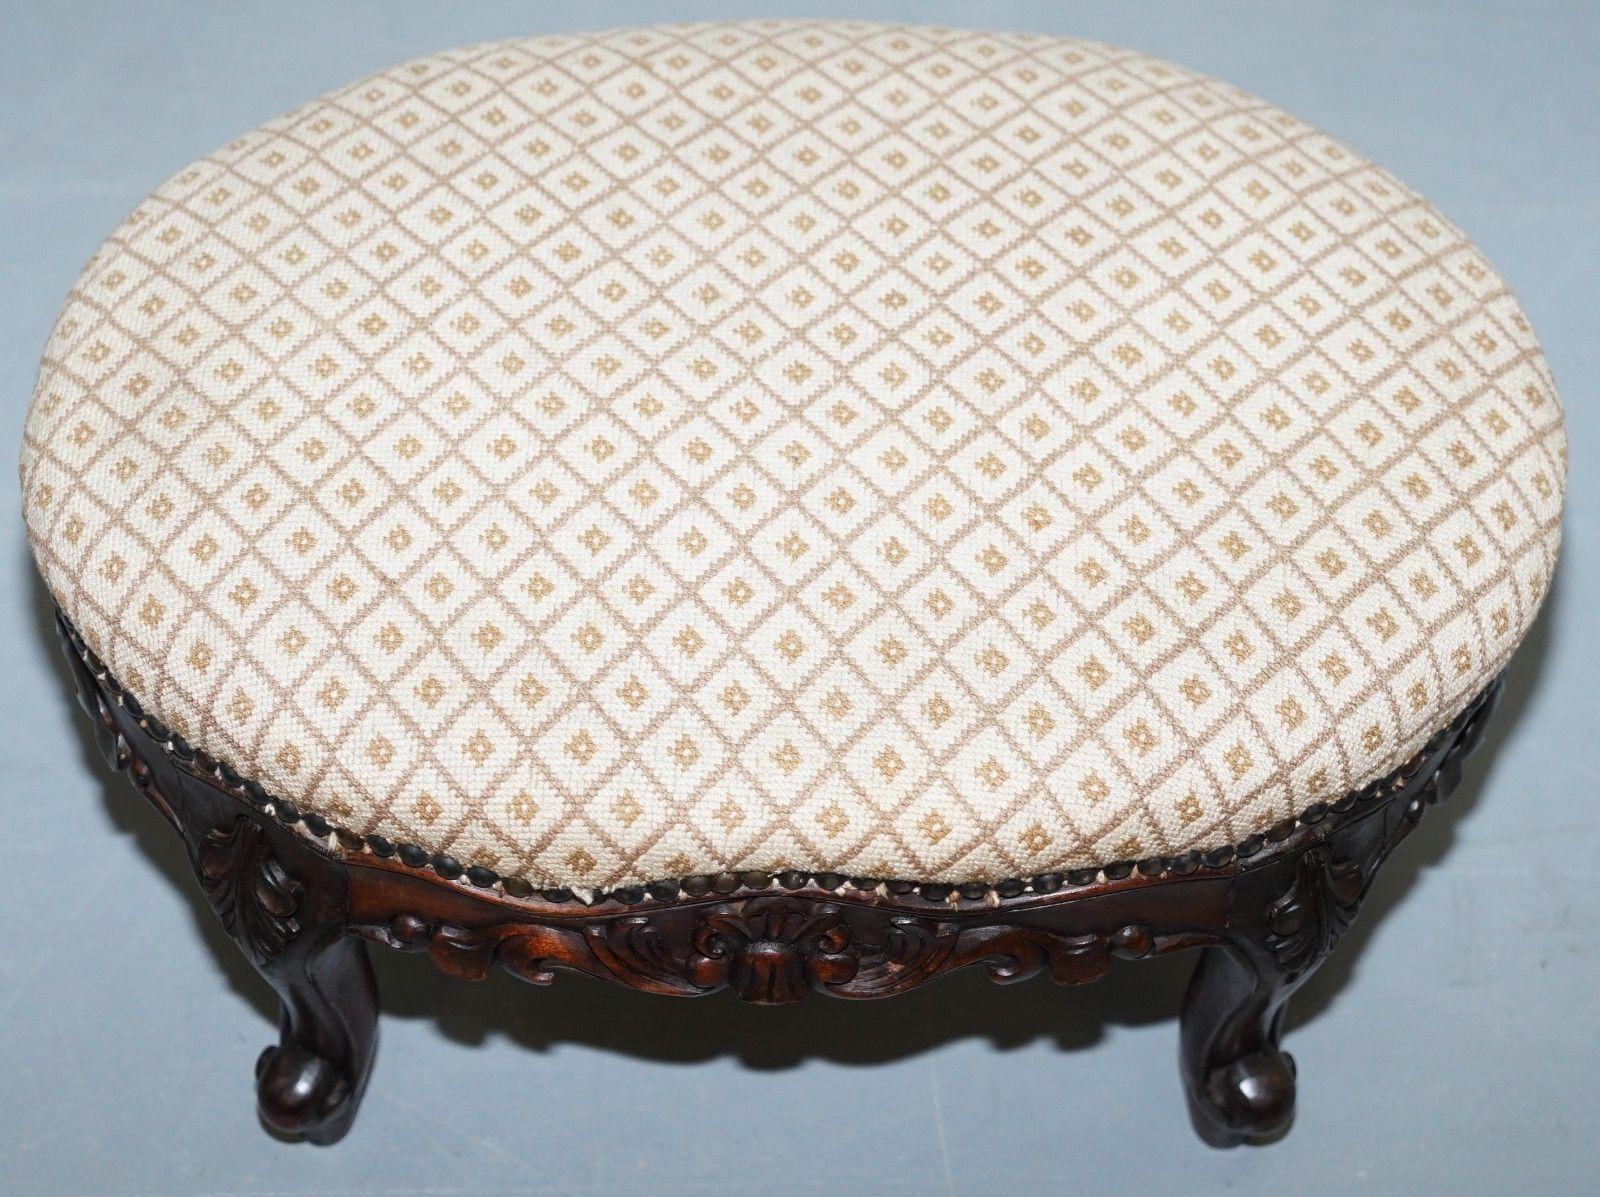 We are delighted to offer for sale this very nice antique mahogany footstool hand carved in the Georgian Irish manor

A good looking well made and piece, we have lightly restored it to include a full wax, hand buff and polish of the timber, the